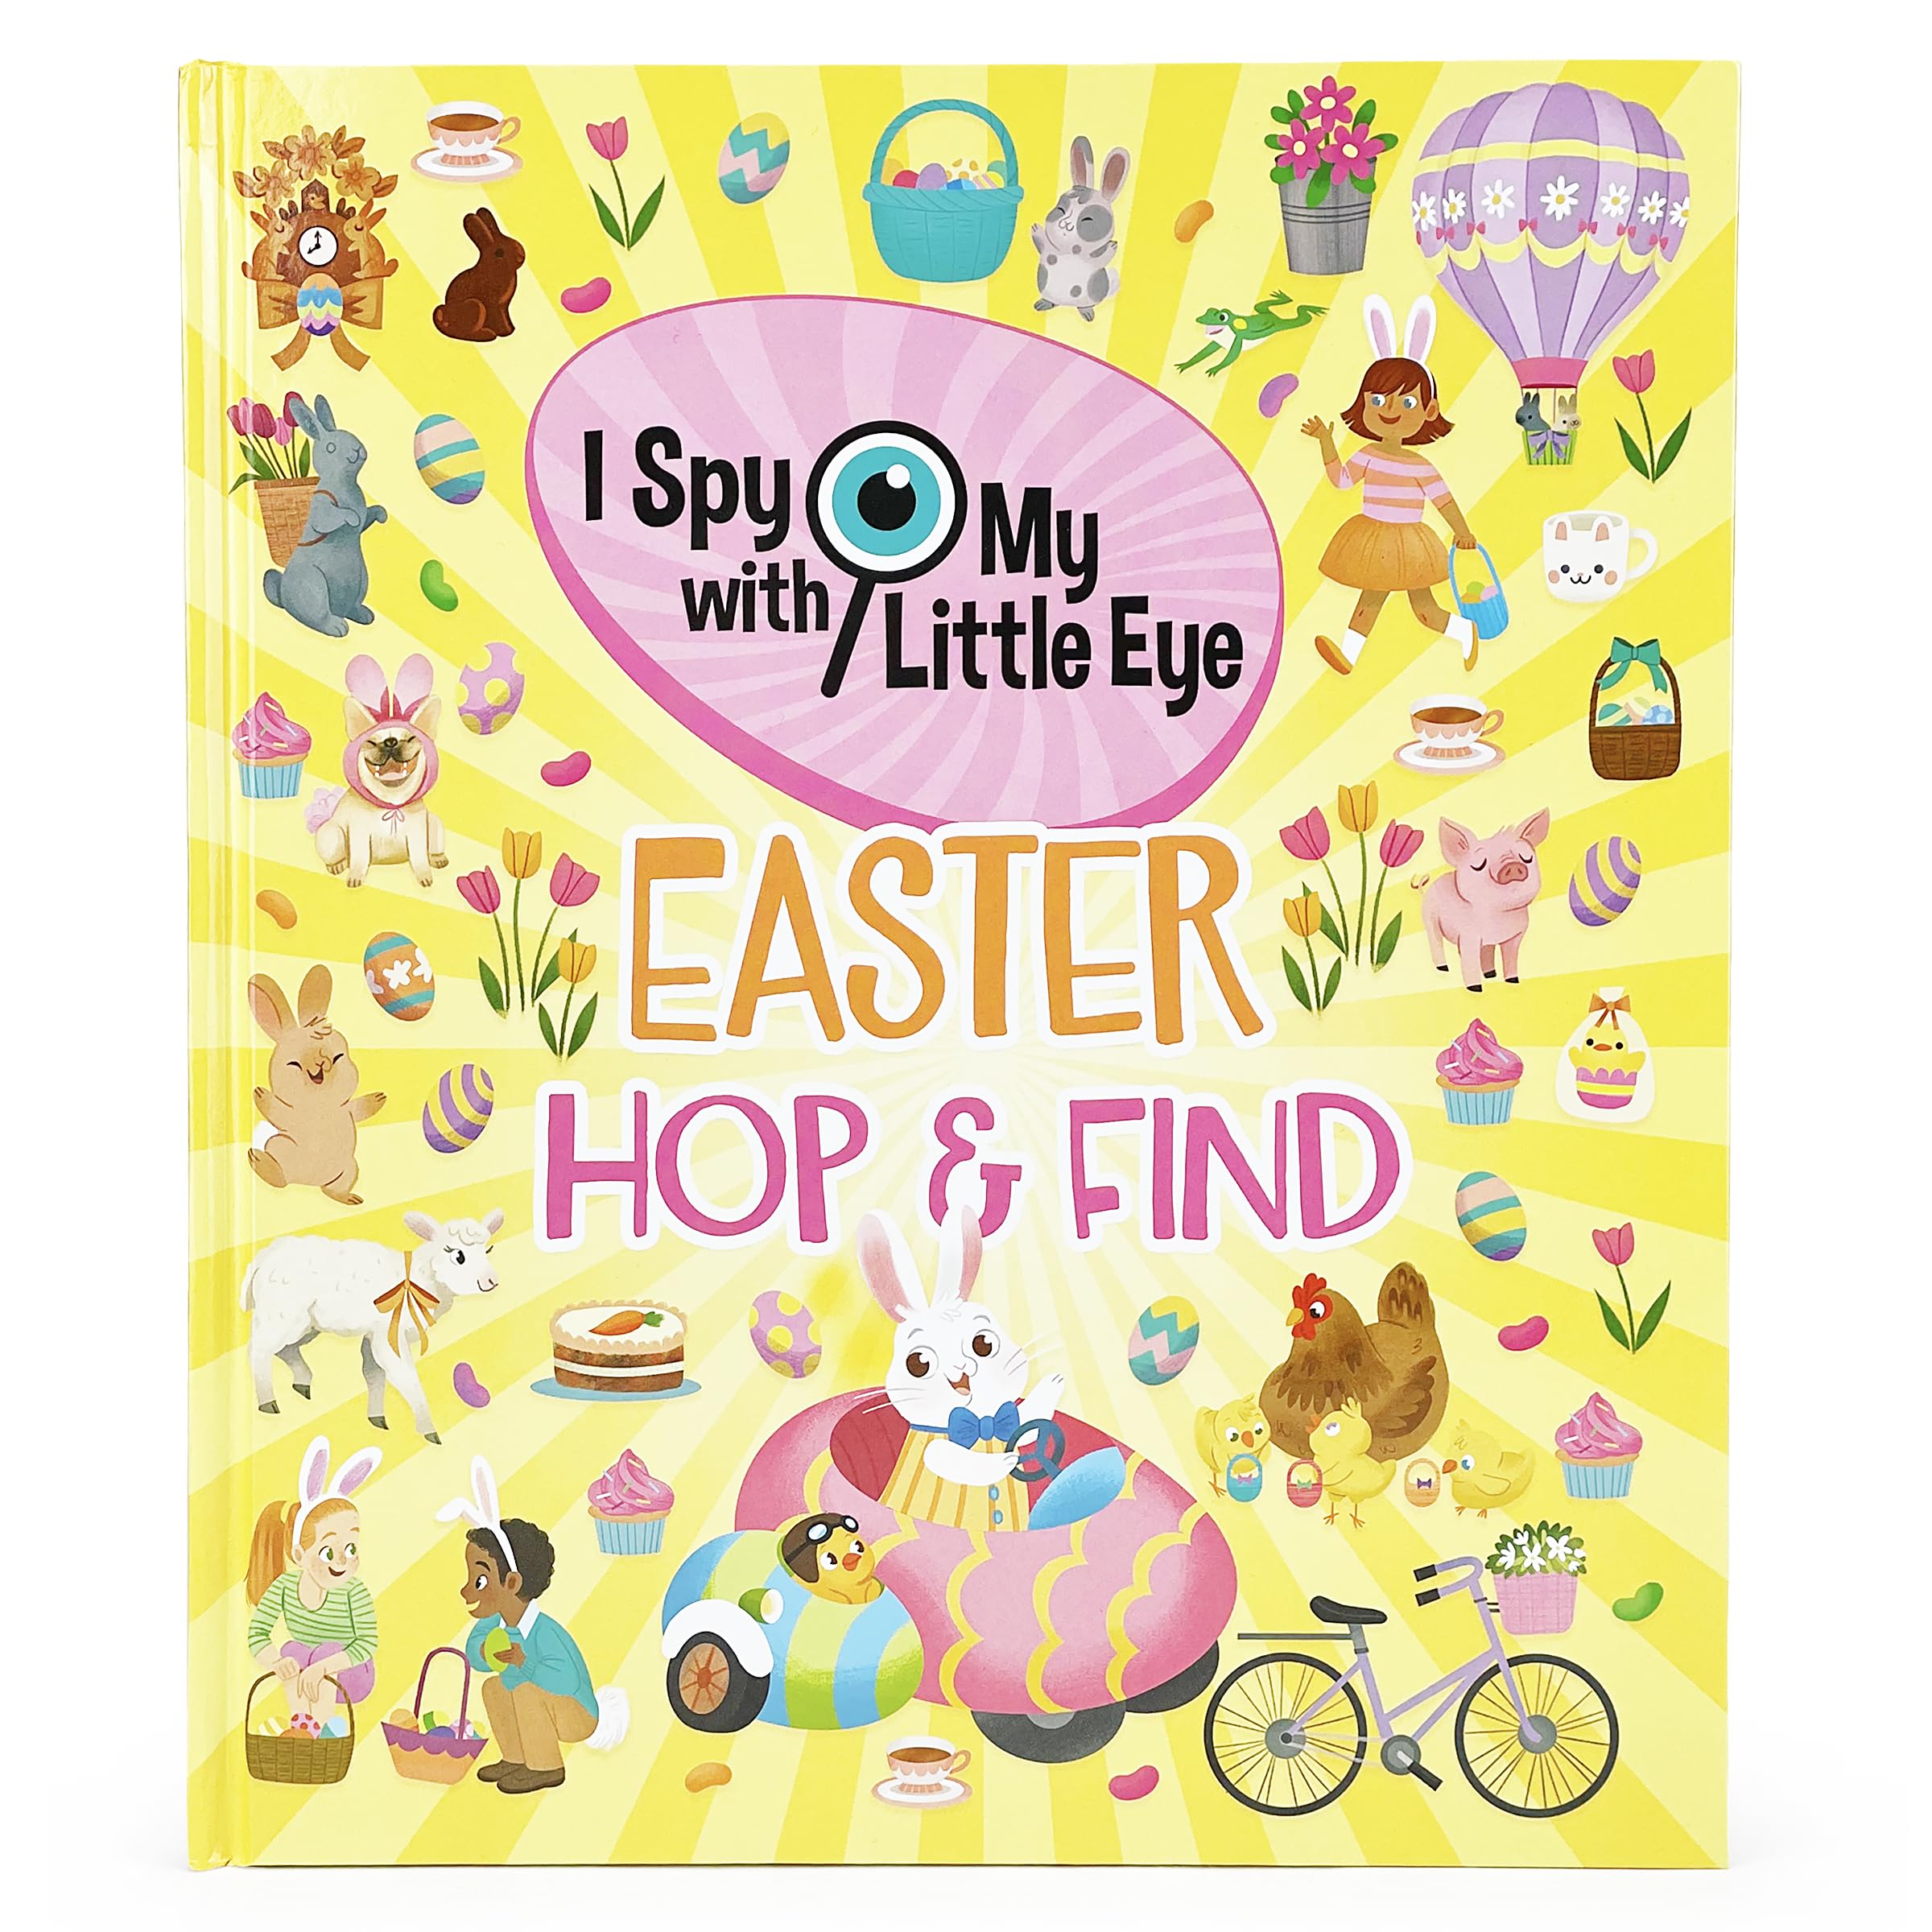 I Spy With My Little Eye Easter Hop & Find - Kids Search, Find, and Seek Activity Book, Ages 3, 4, 5, 6+